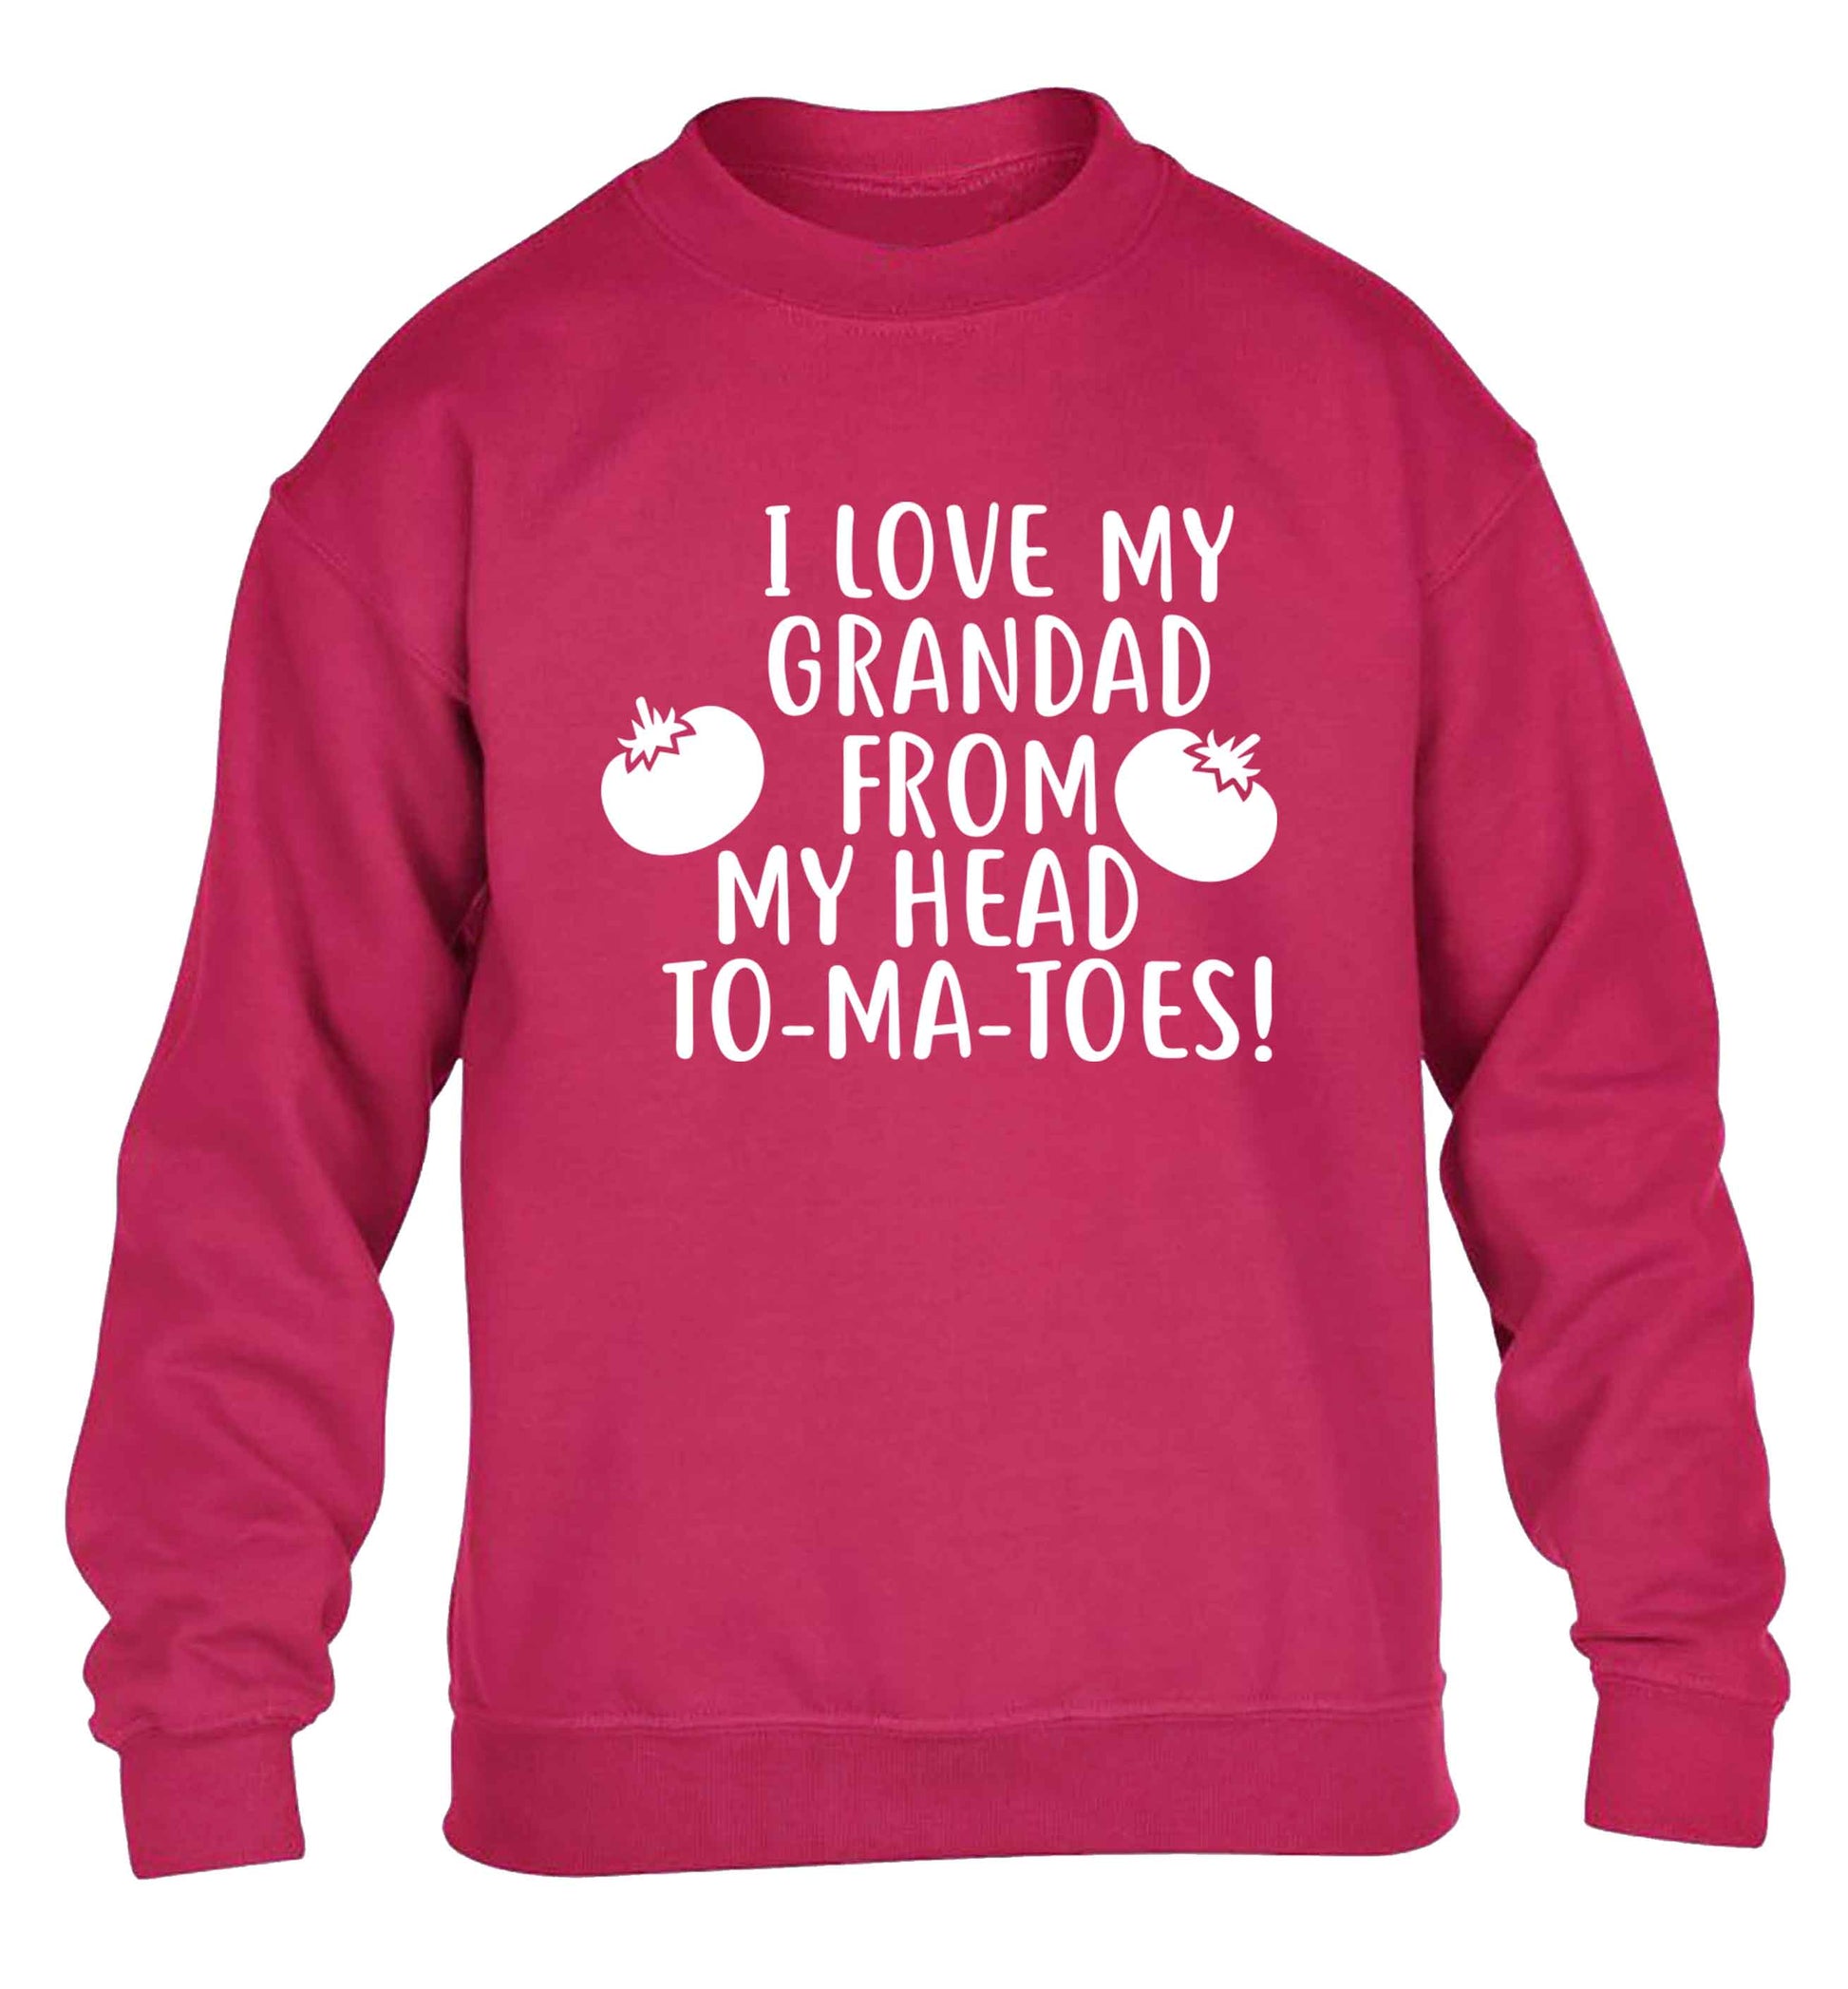 I love my grandad from my head To-Ma-Toes children's pink sweater 12-13 Years